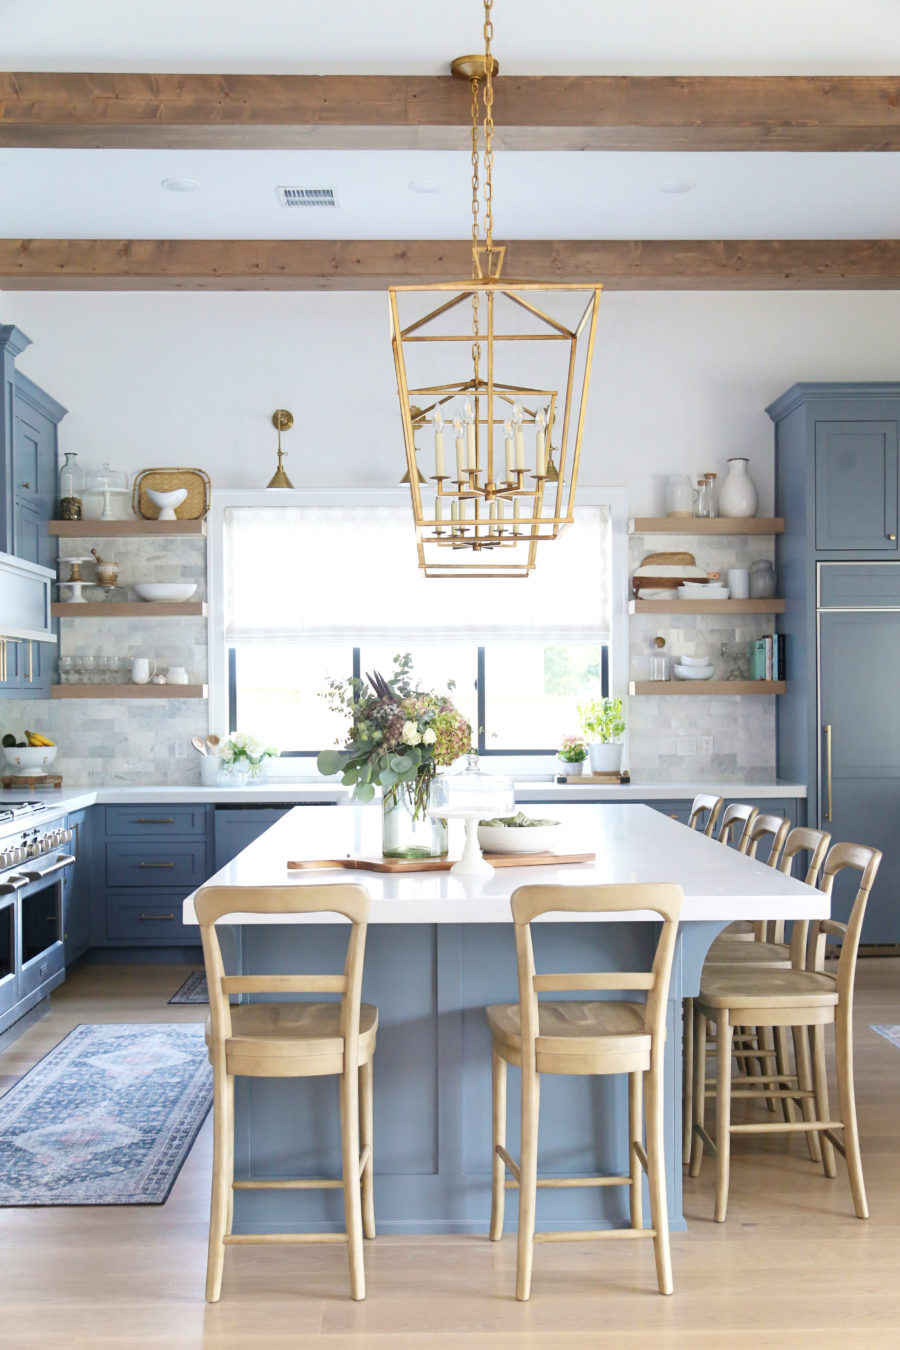 Muted blue kitchen cabinets